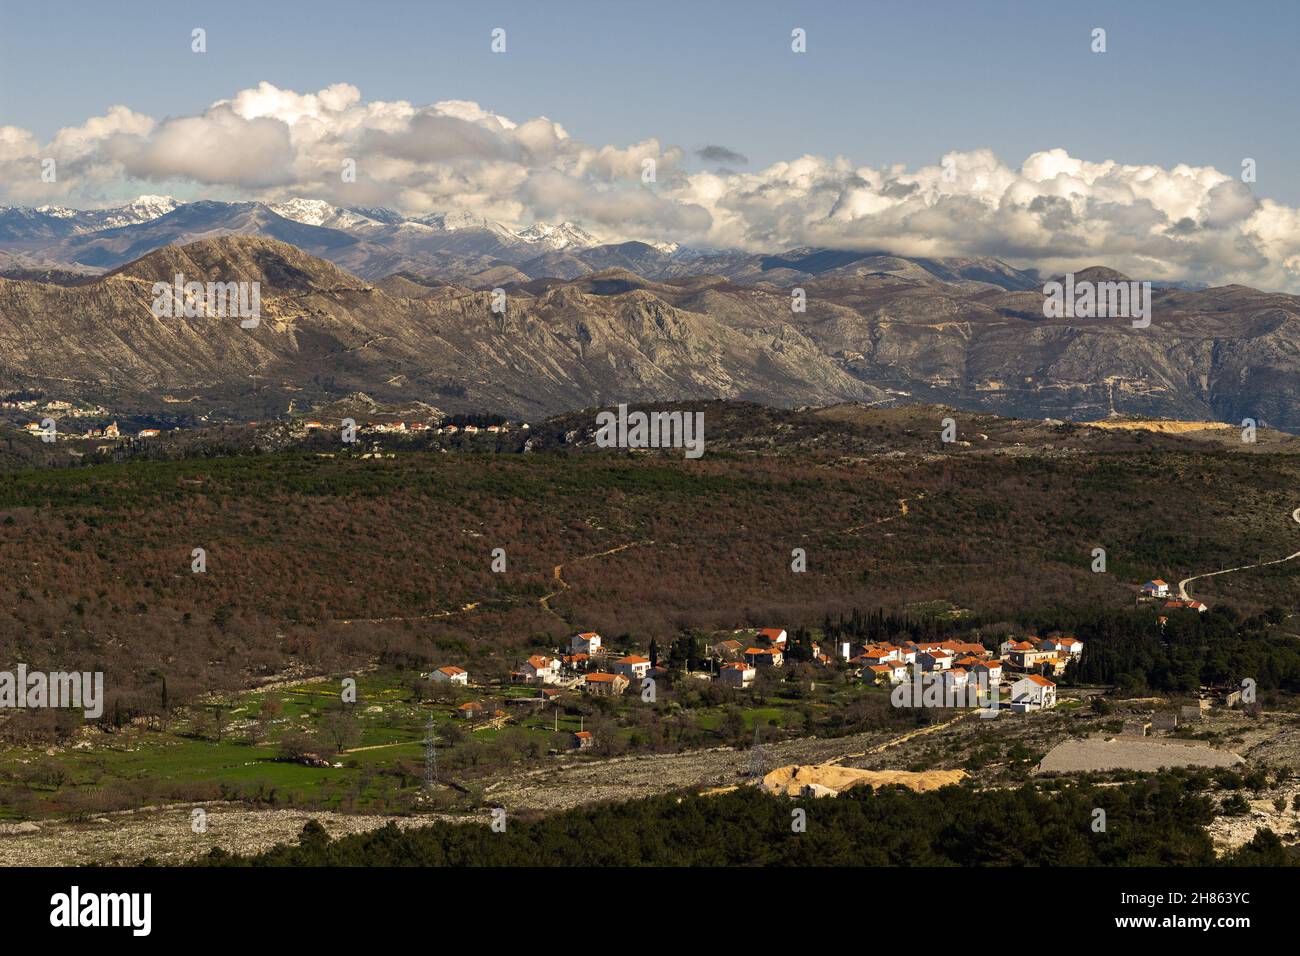 A scenic valley with a mountainscape in the background, Dubrovnik, Croatia Stock Photo